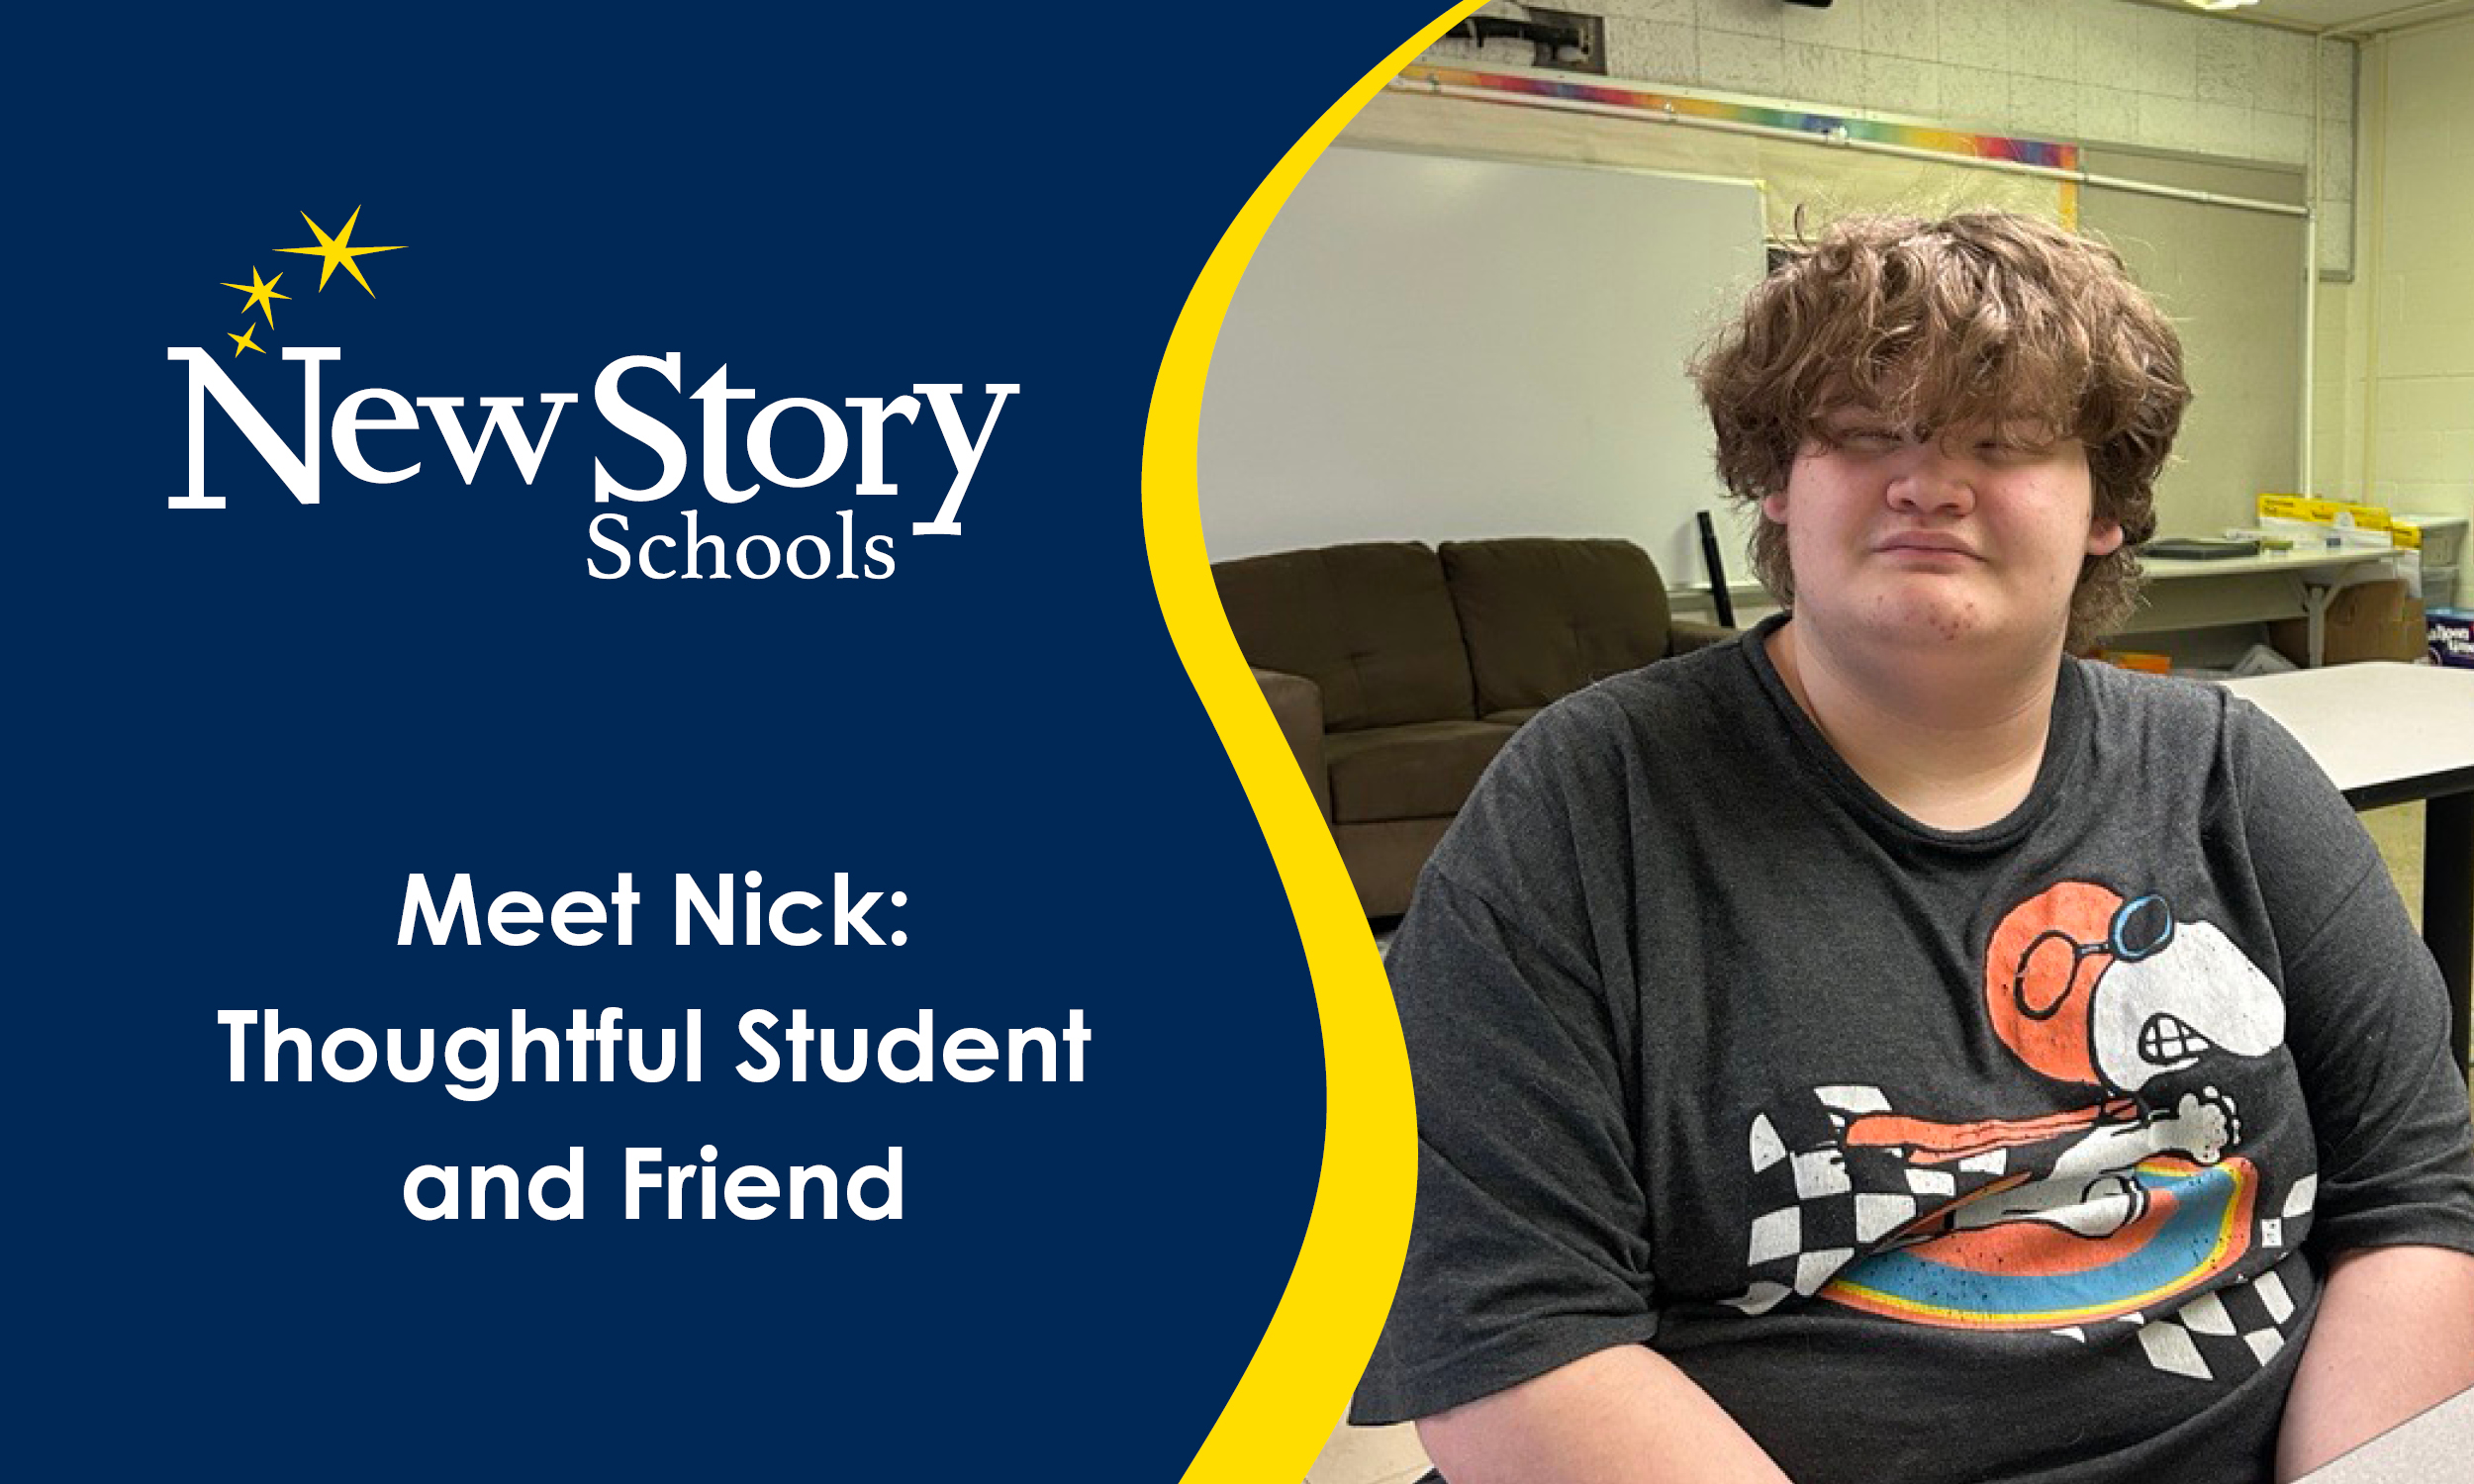 Meet Nick: Thoughtful Student and Friend